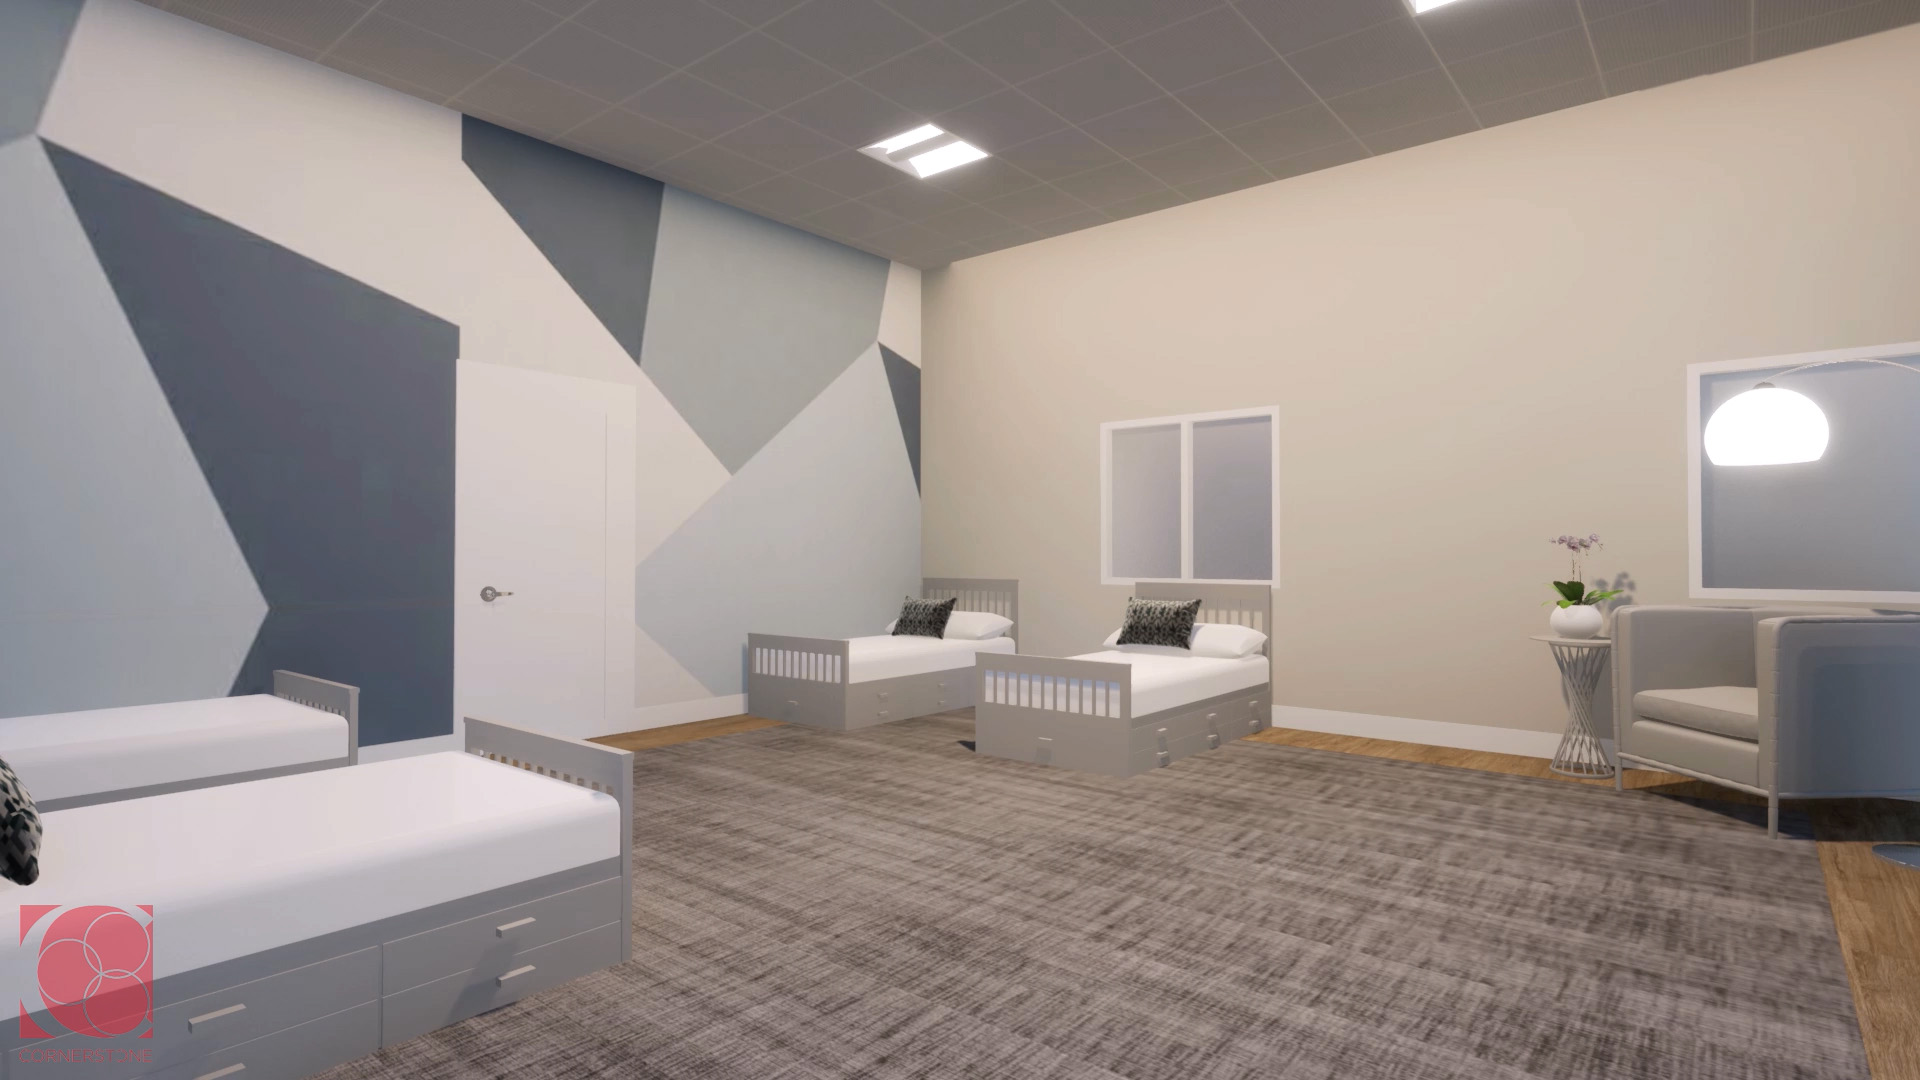 One view of artists rendering of new bedroom facilities.